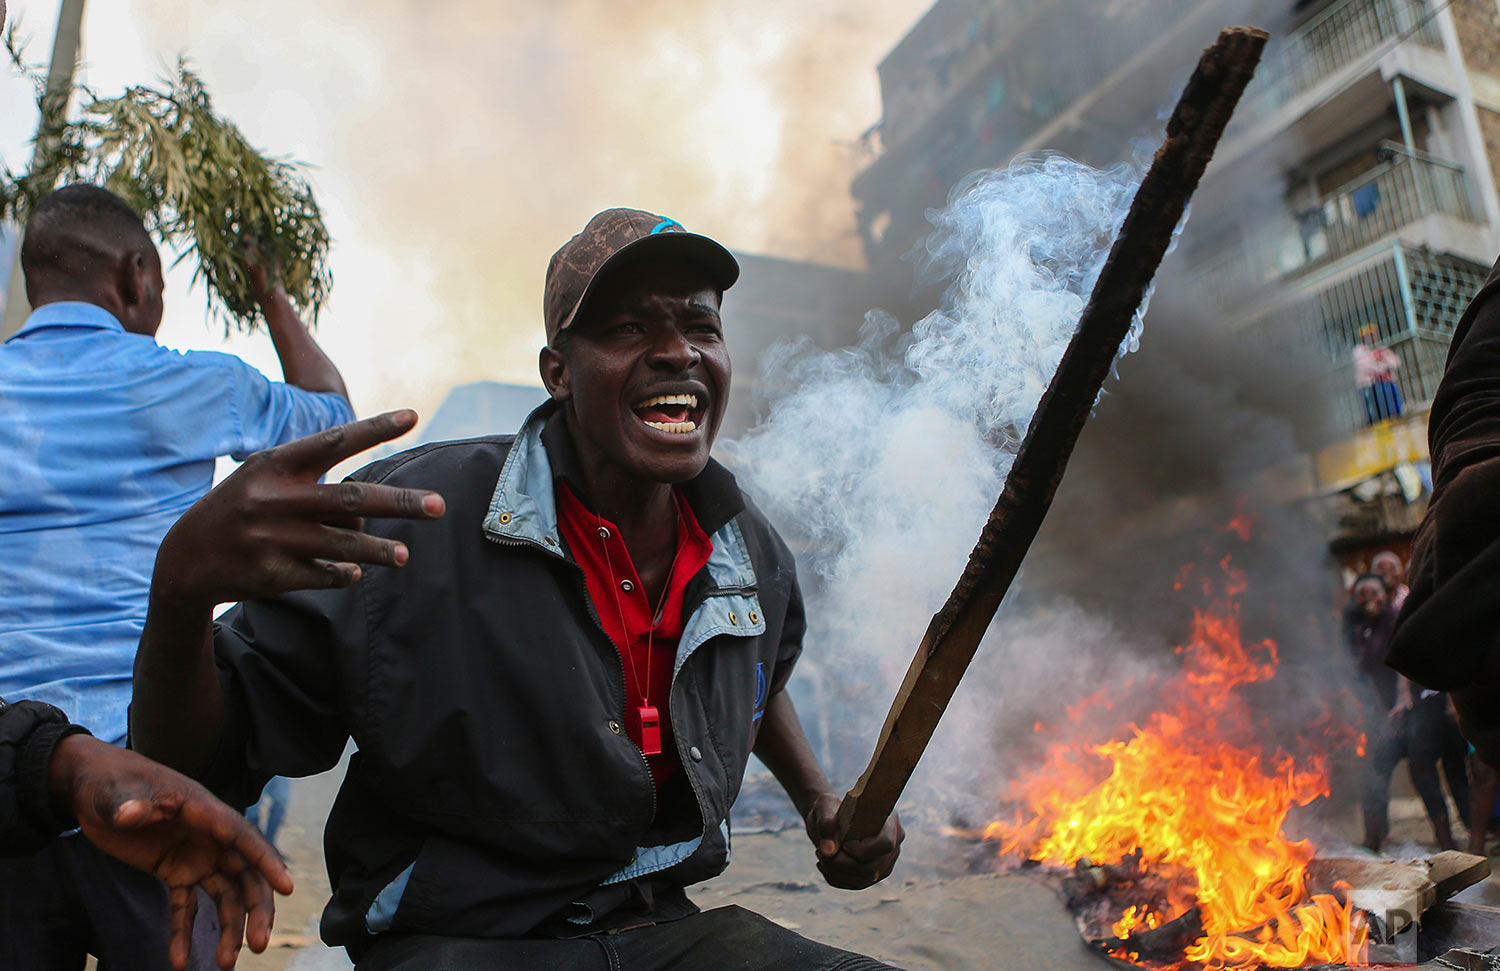  Residents of the Mathare area of Nairobi, Kenya, take to the streets by blocking roads with burning tyres to protest in support of Kenyan opposition leader and presidential candidate Raila Odinga, Wednesday, Aug. 9, 2017. Odinga alleges that hackers